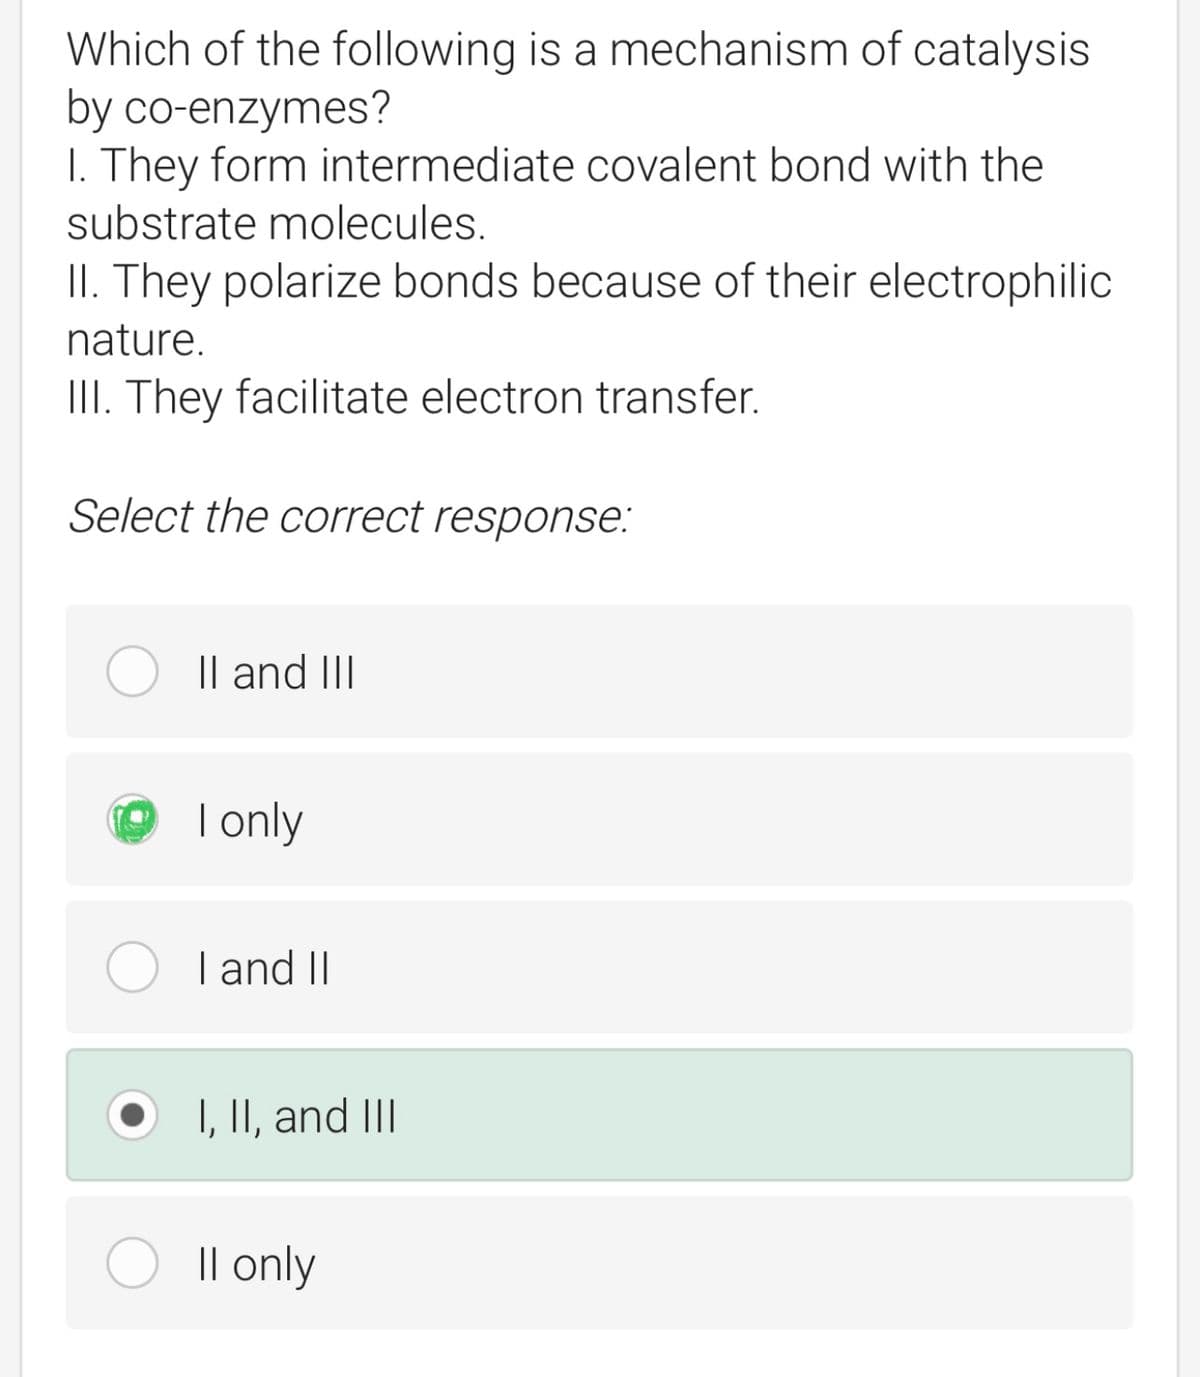 Which of the following is a mechanism of catalysis
by co-enzymes?
1. They form intermediate covalent bond with the
substrate molecules.
II. They polarize bonds because of their electrophilic
nature.
III. They facilitate electron transfer.
Select the correct response:
II and III
I only
I and II
I, II, and III
Il only